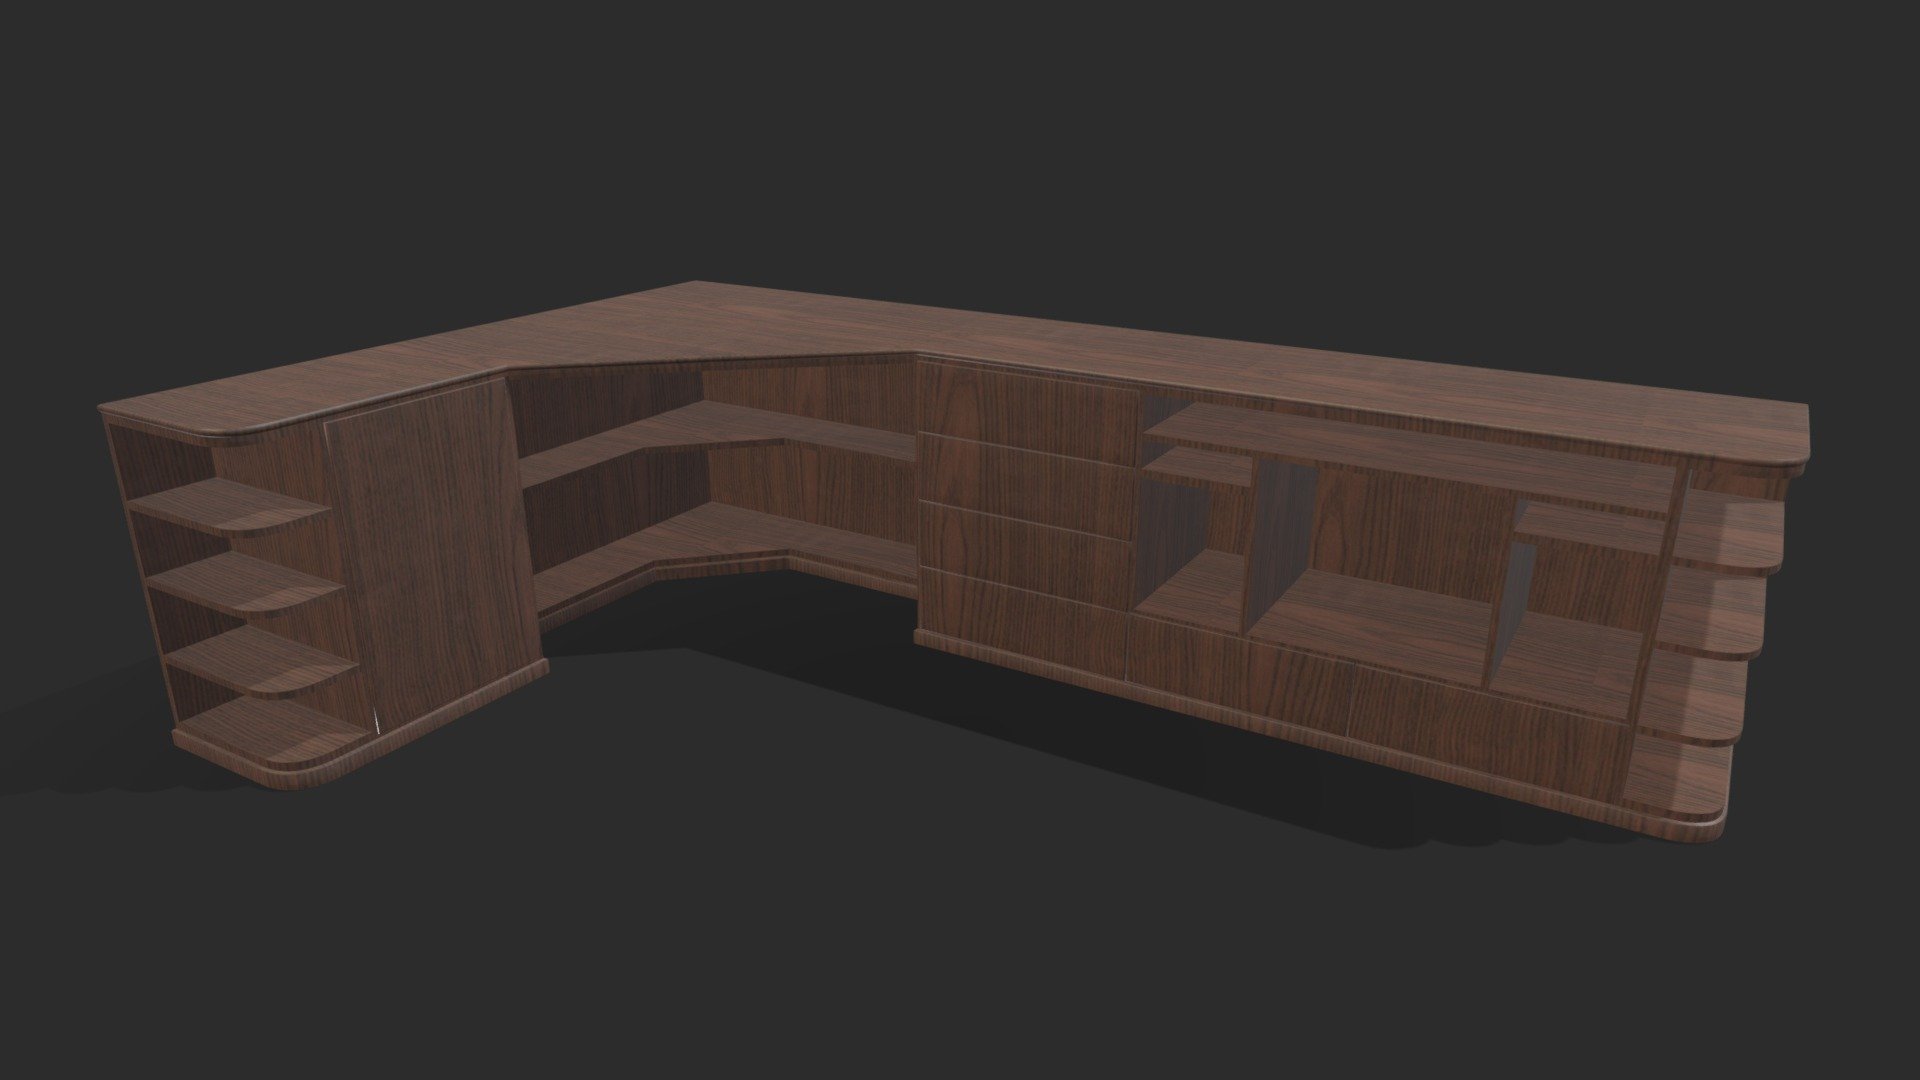 Computer Desk Portico Moveis M01 

All 3d modeled in 3ds max - Low Poly :D

1 Texture WoodBrown

Formats: Obj | Fbx | 3ds Max 20-23 - Computer Desk Portico Moveis M01 - 3D model by lorranmedeiros 3d model